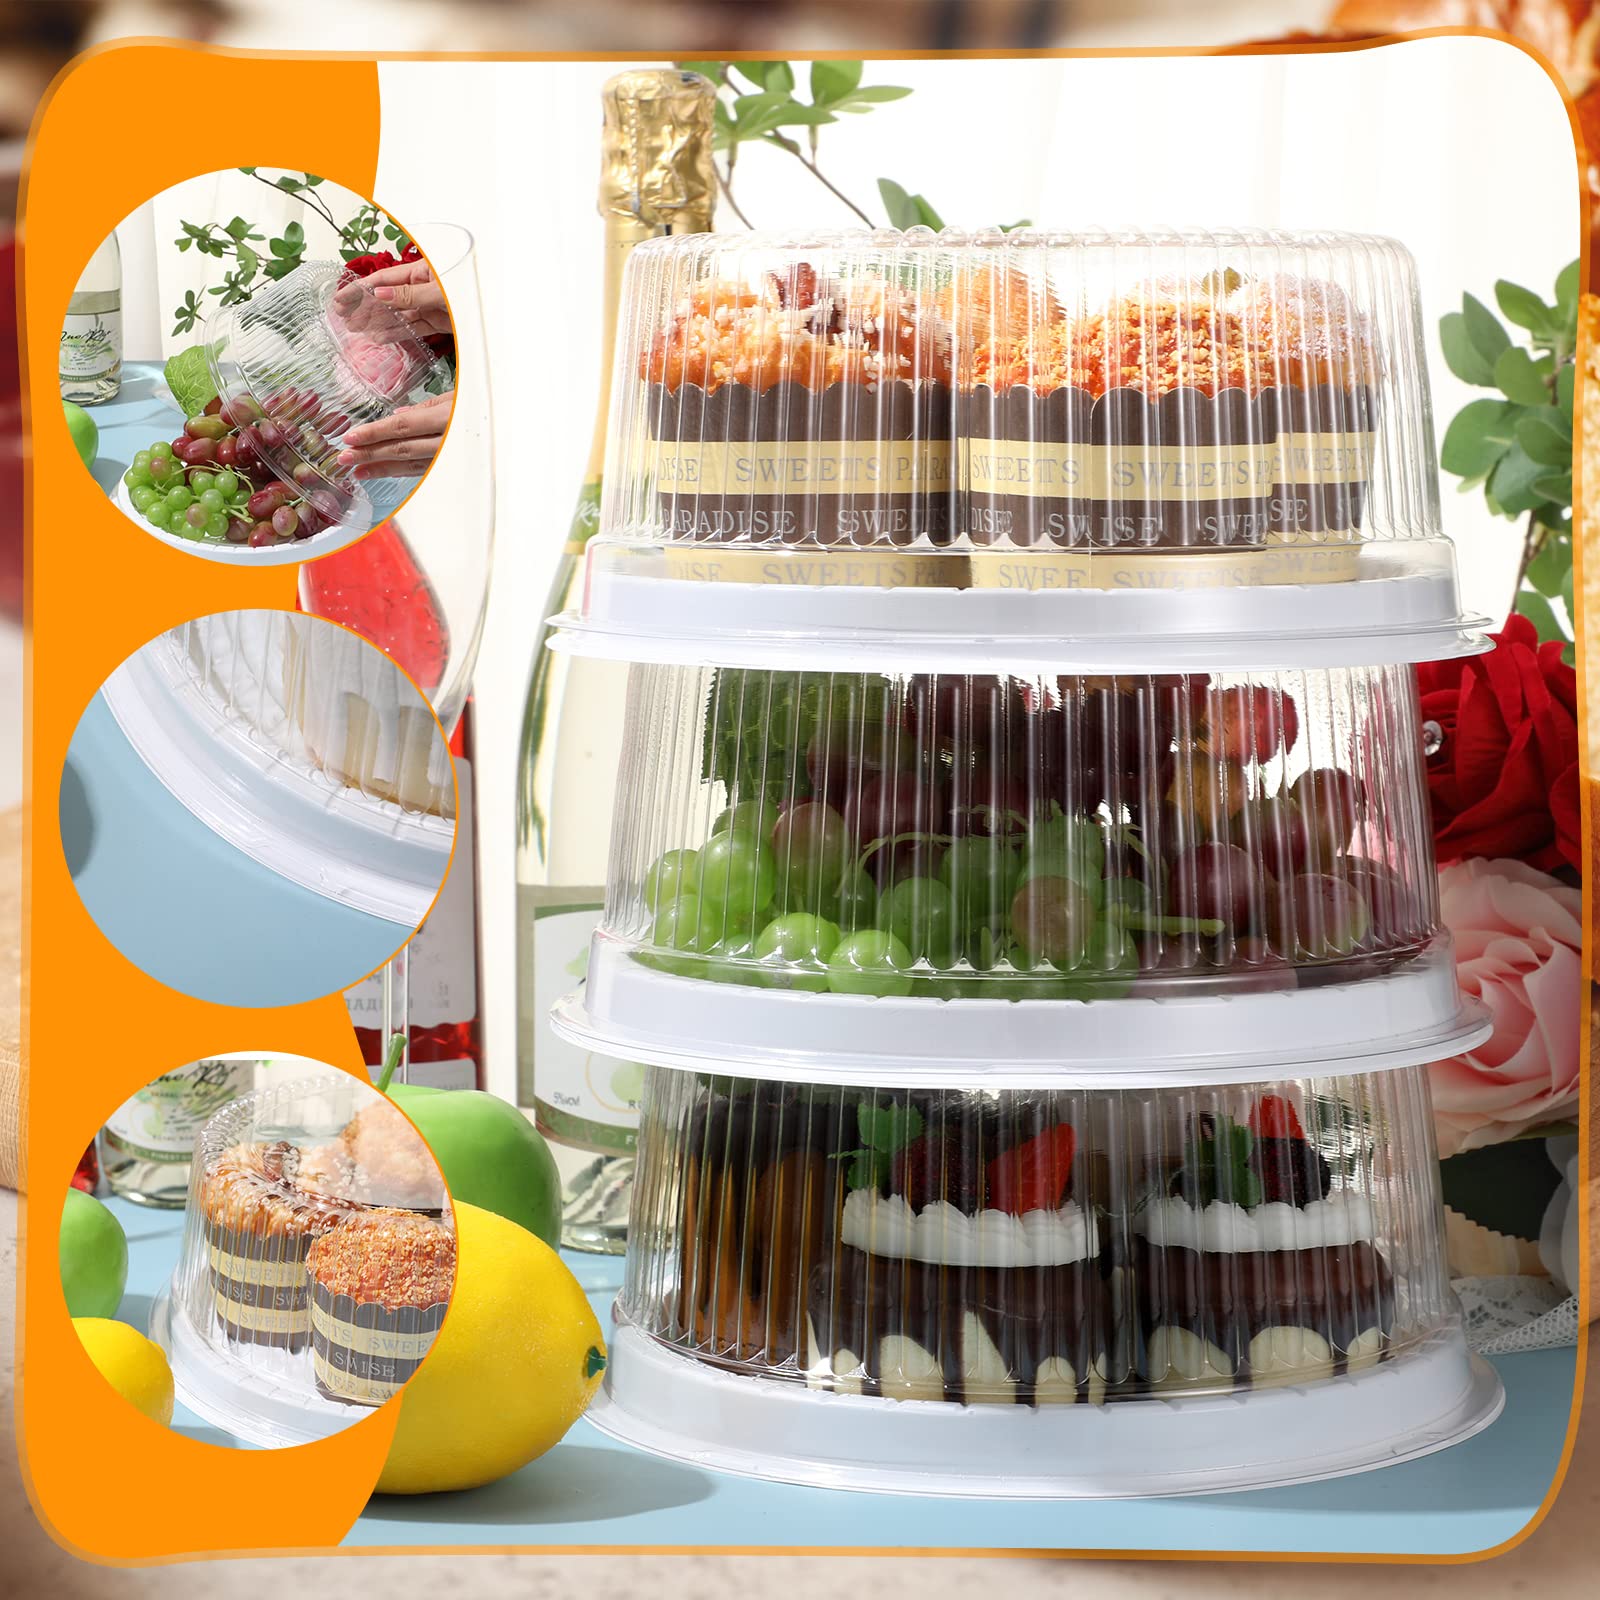 Nuanchu 24 Pieces 8 Inch Disposable Cake Containers with Lids Plastic Serving Tray Clear Platters with Clear Lids Round Disposable Cake Holder for Storing Party Takeout Food Catering Display (White)